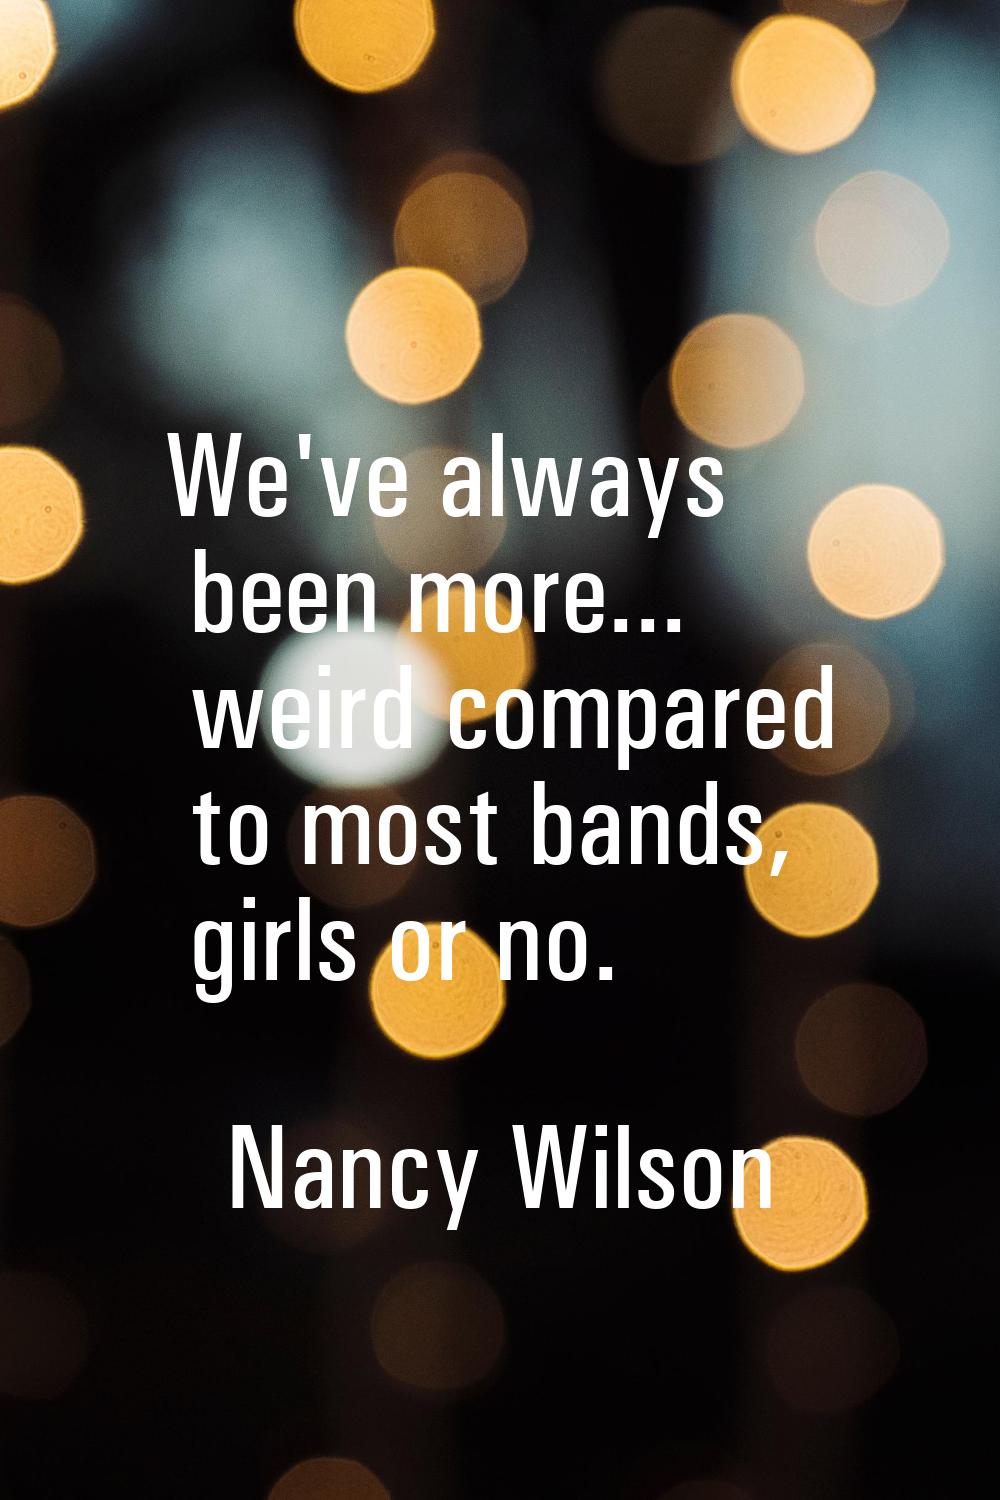 We've always been more... weird compared to most bands, girls or no.